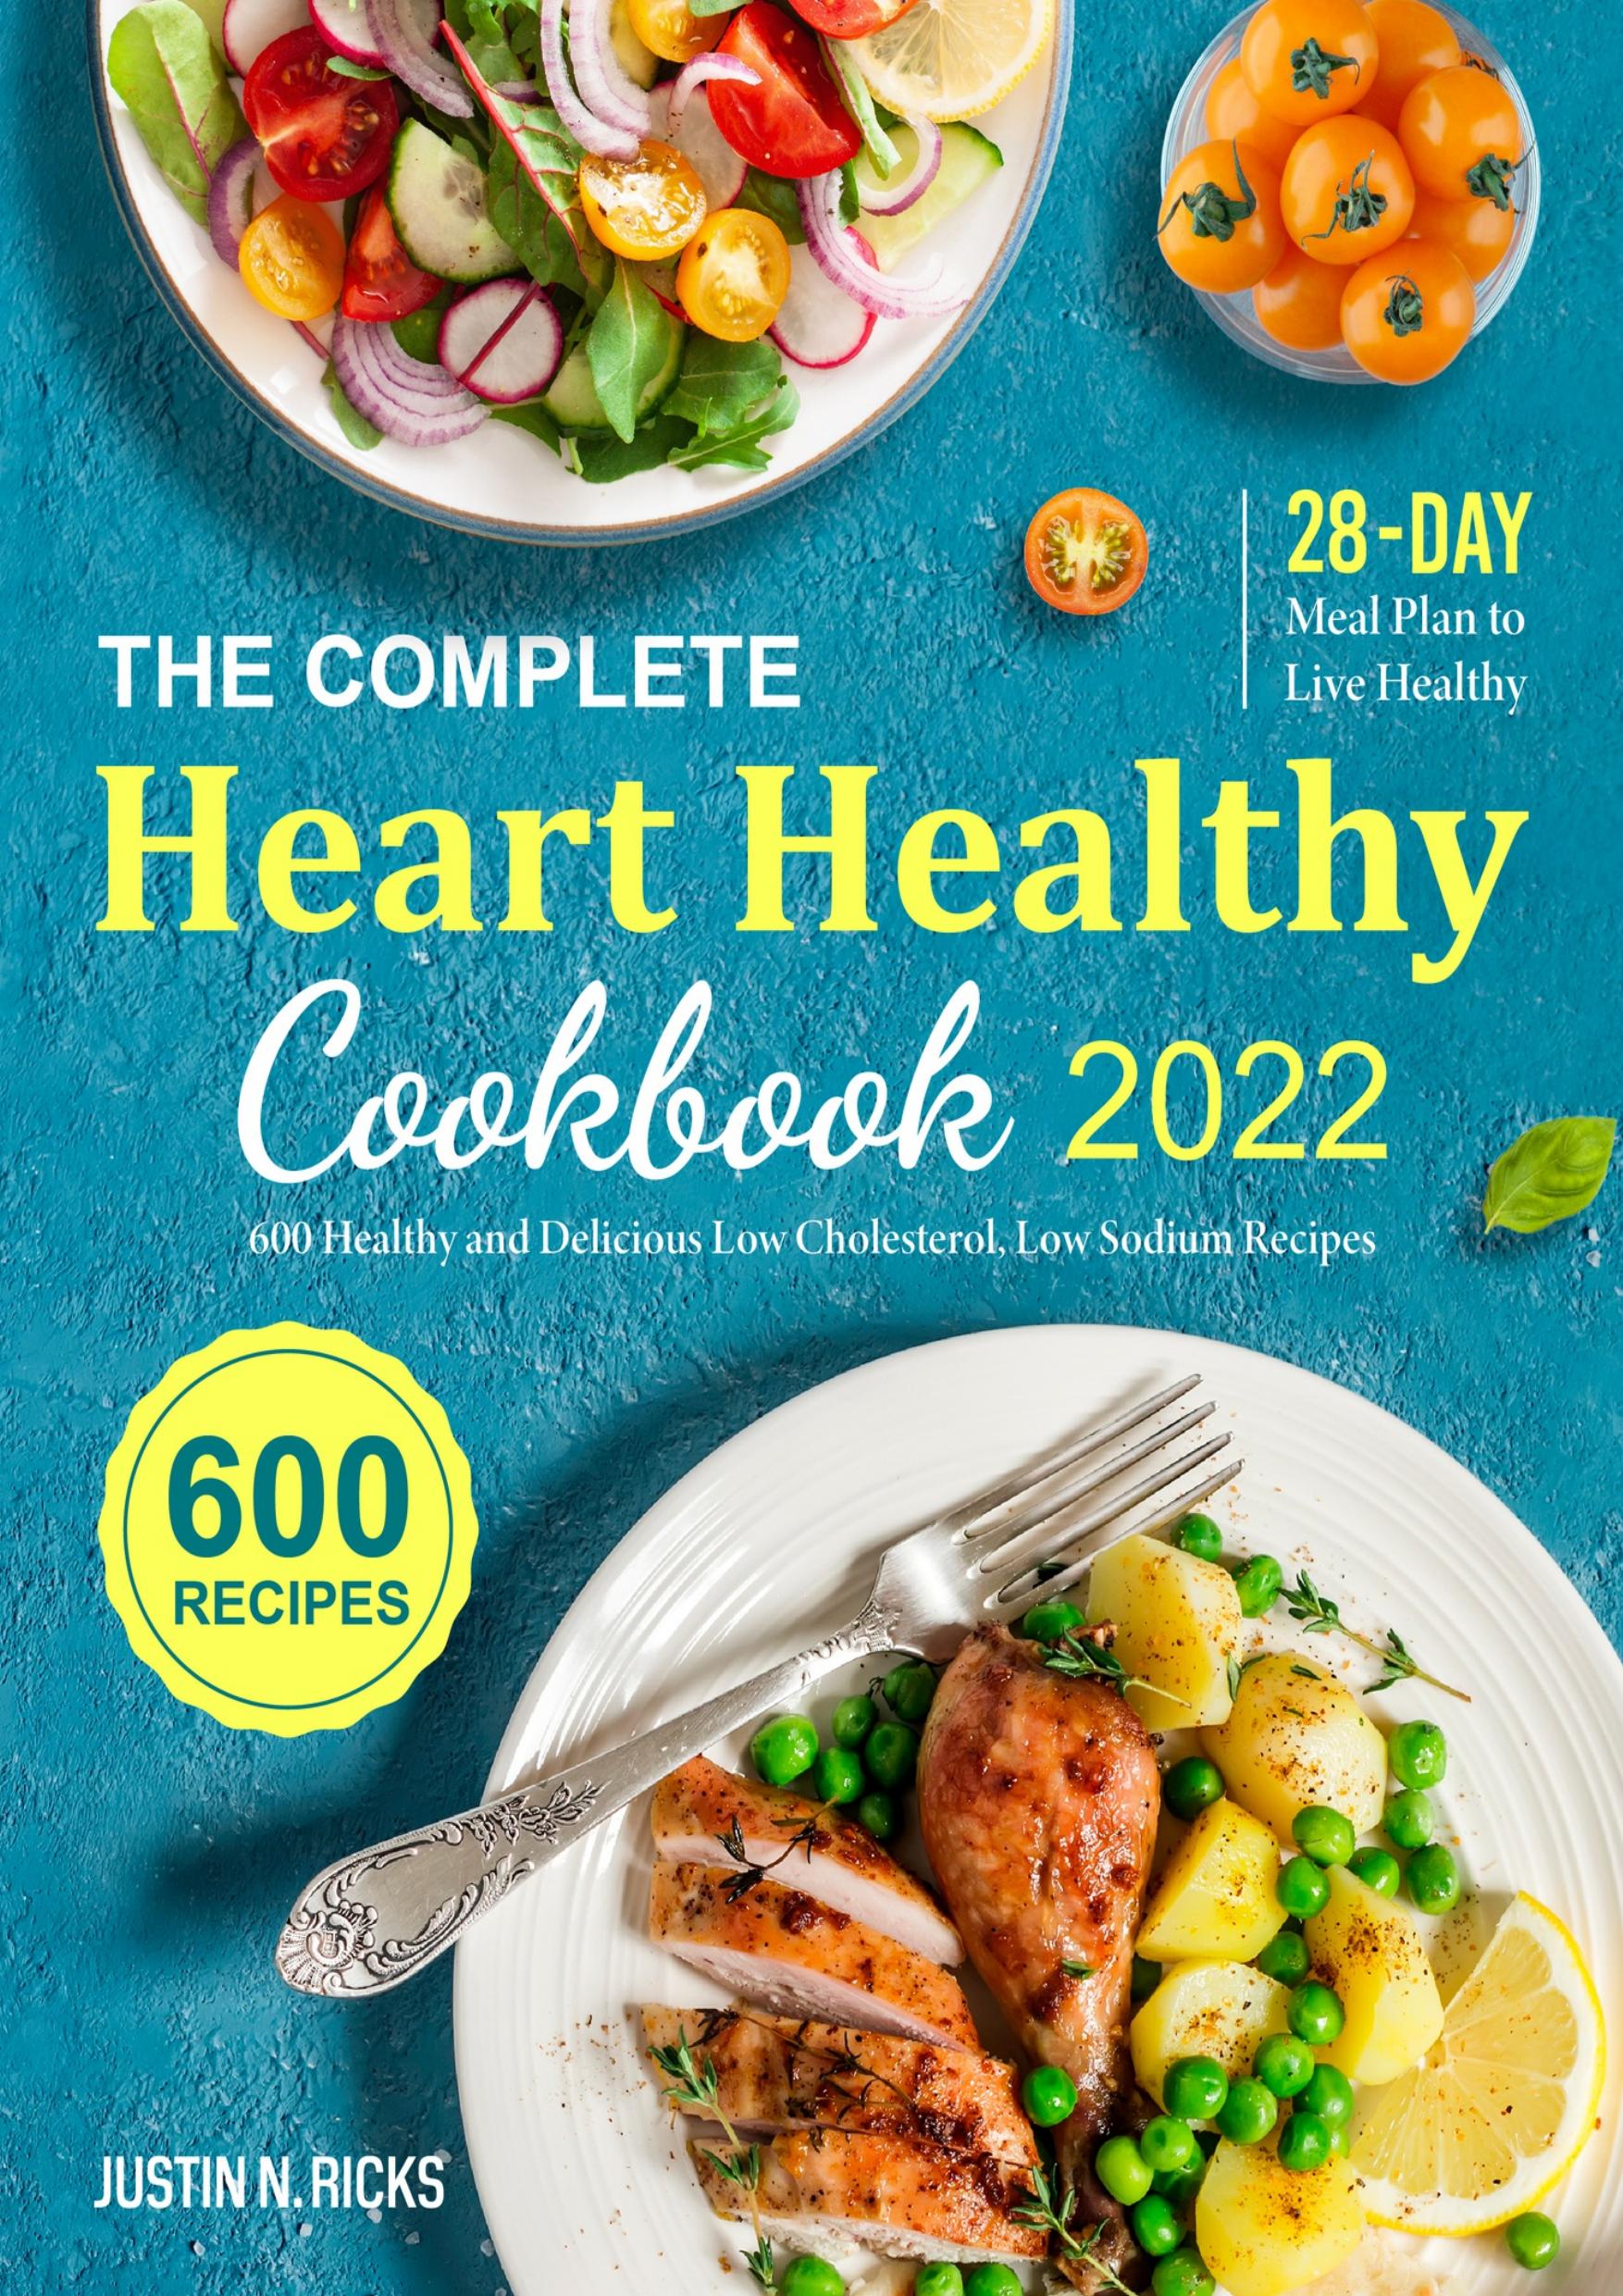 The Complete Heart Healthy Cookbook 2022: 600 Healthy and Delicious Low Cholesterol, Low Sodium Recipes with 28-Day Meal Plan to Live Healthy by Ricks Justin N